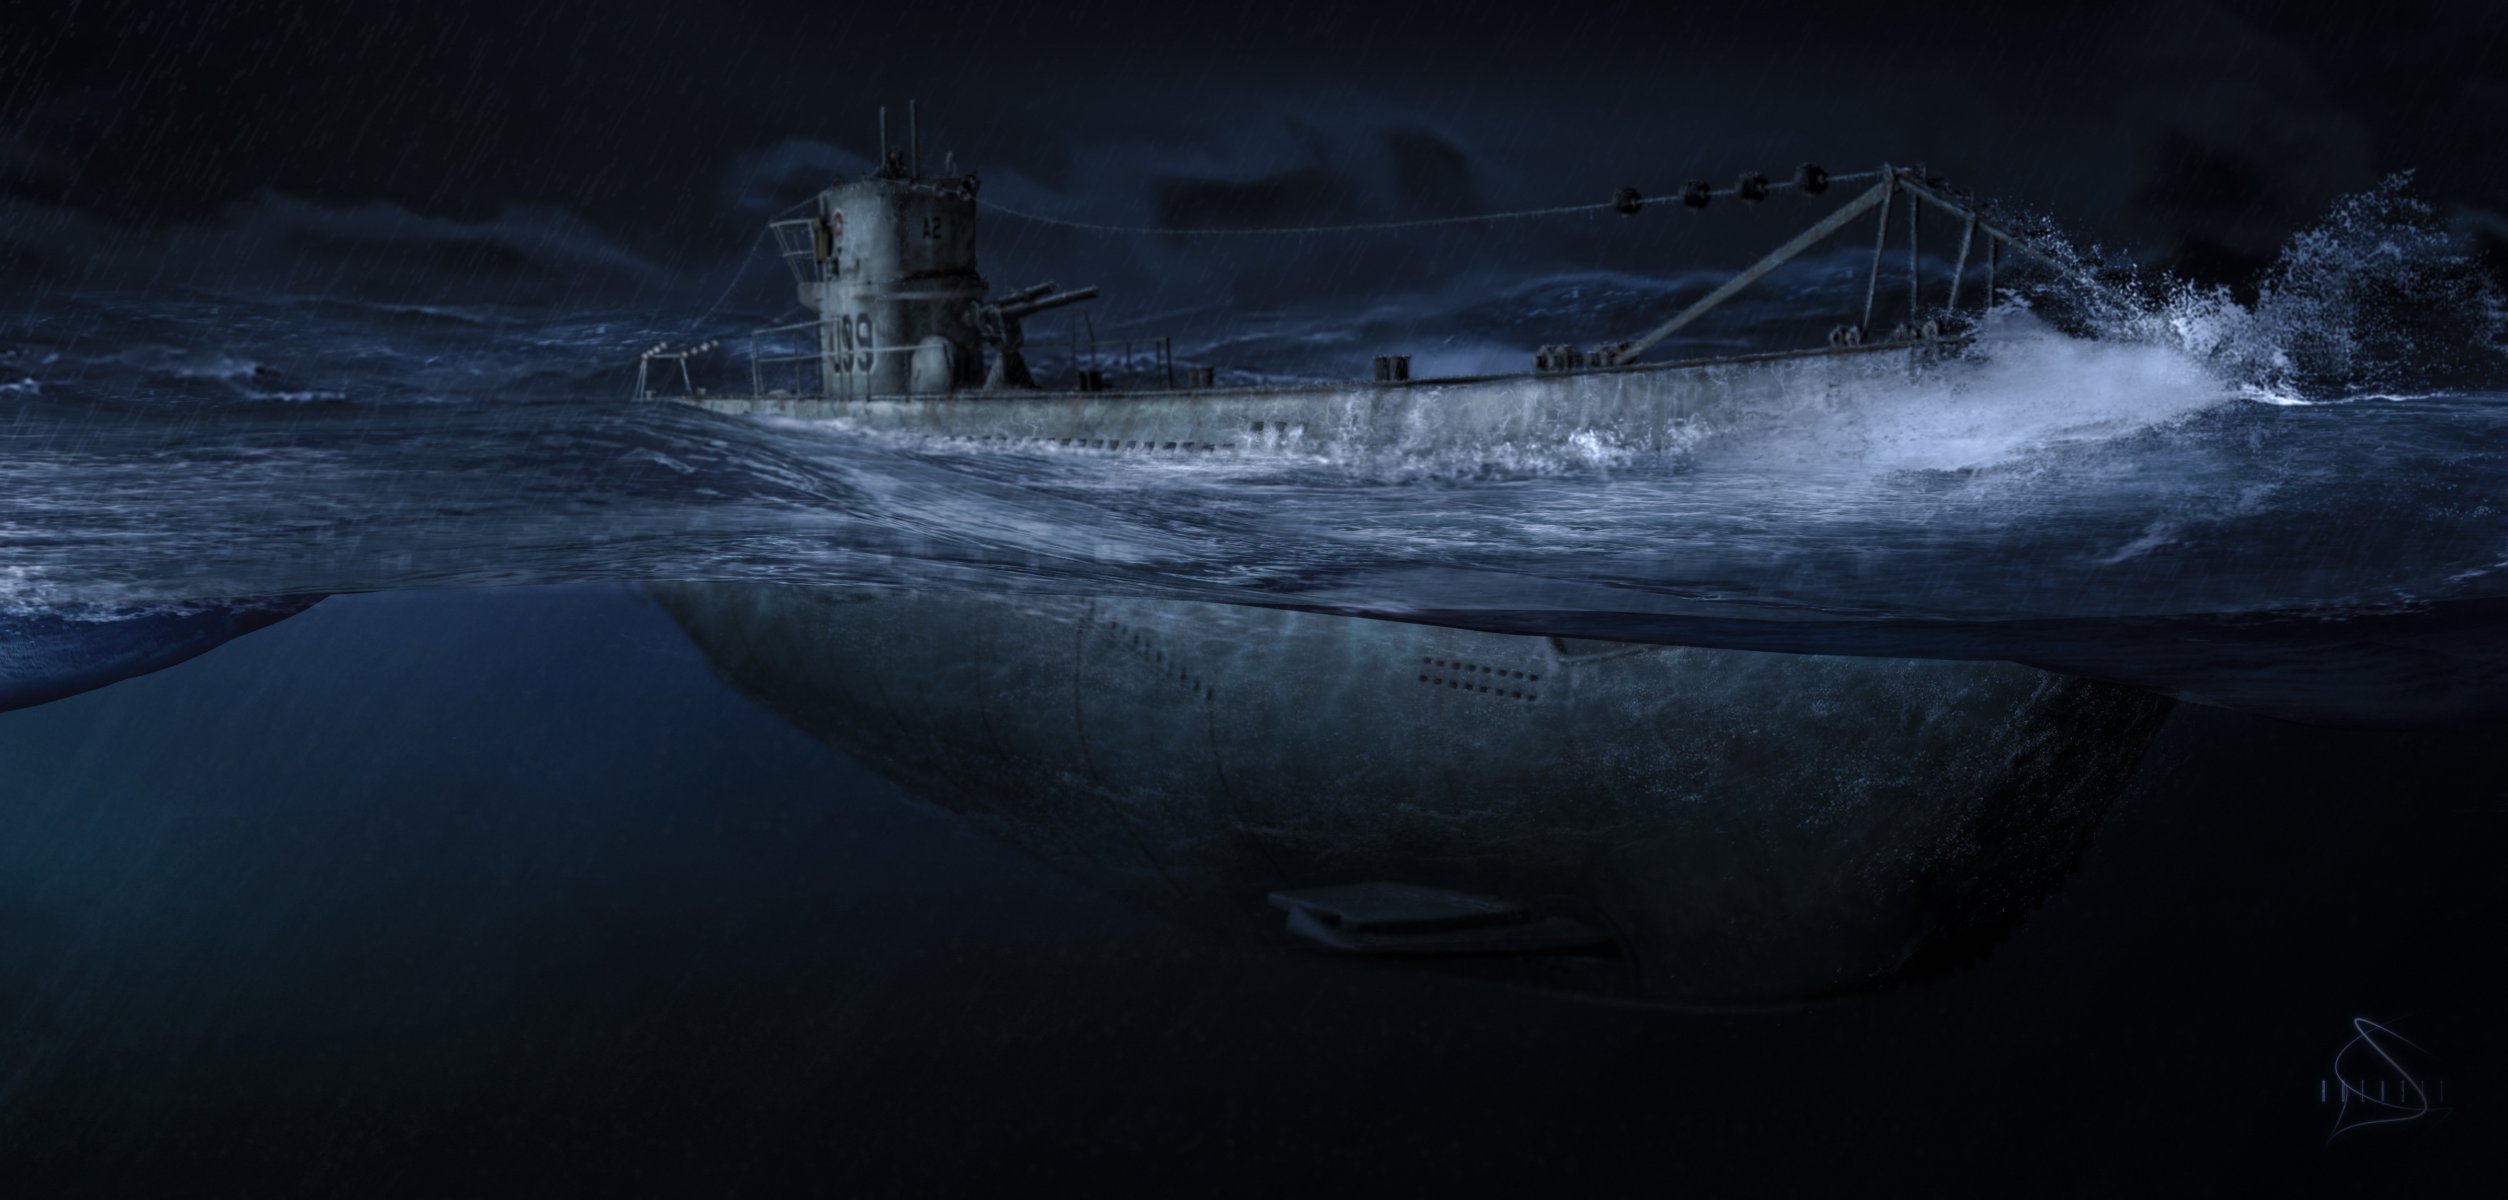 HD wallpaper art ocean night submarine u-99 one from very known and